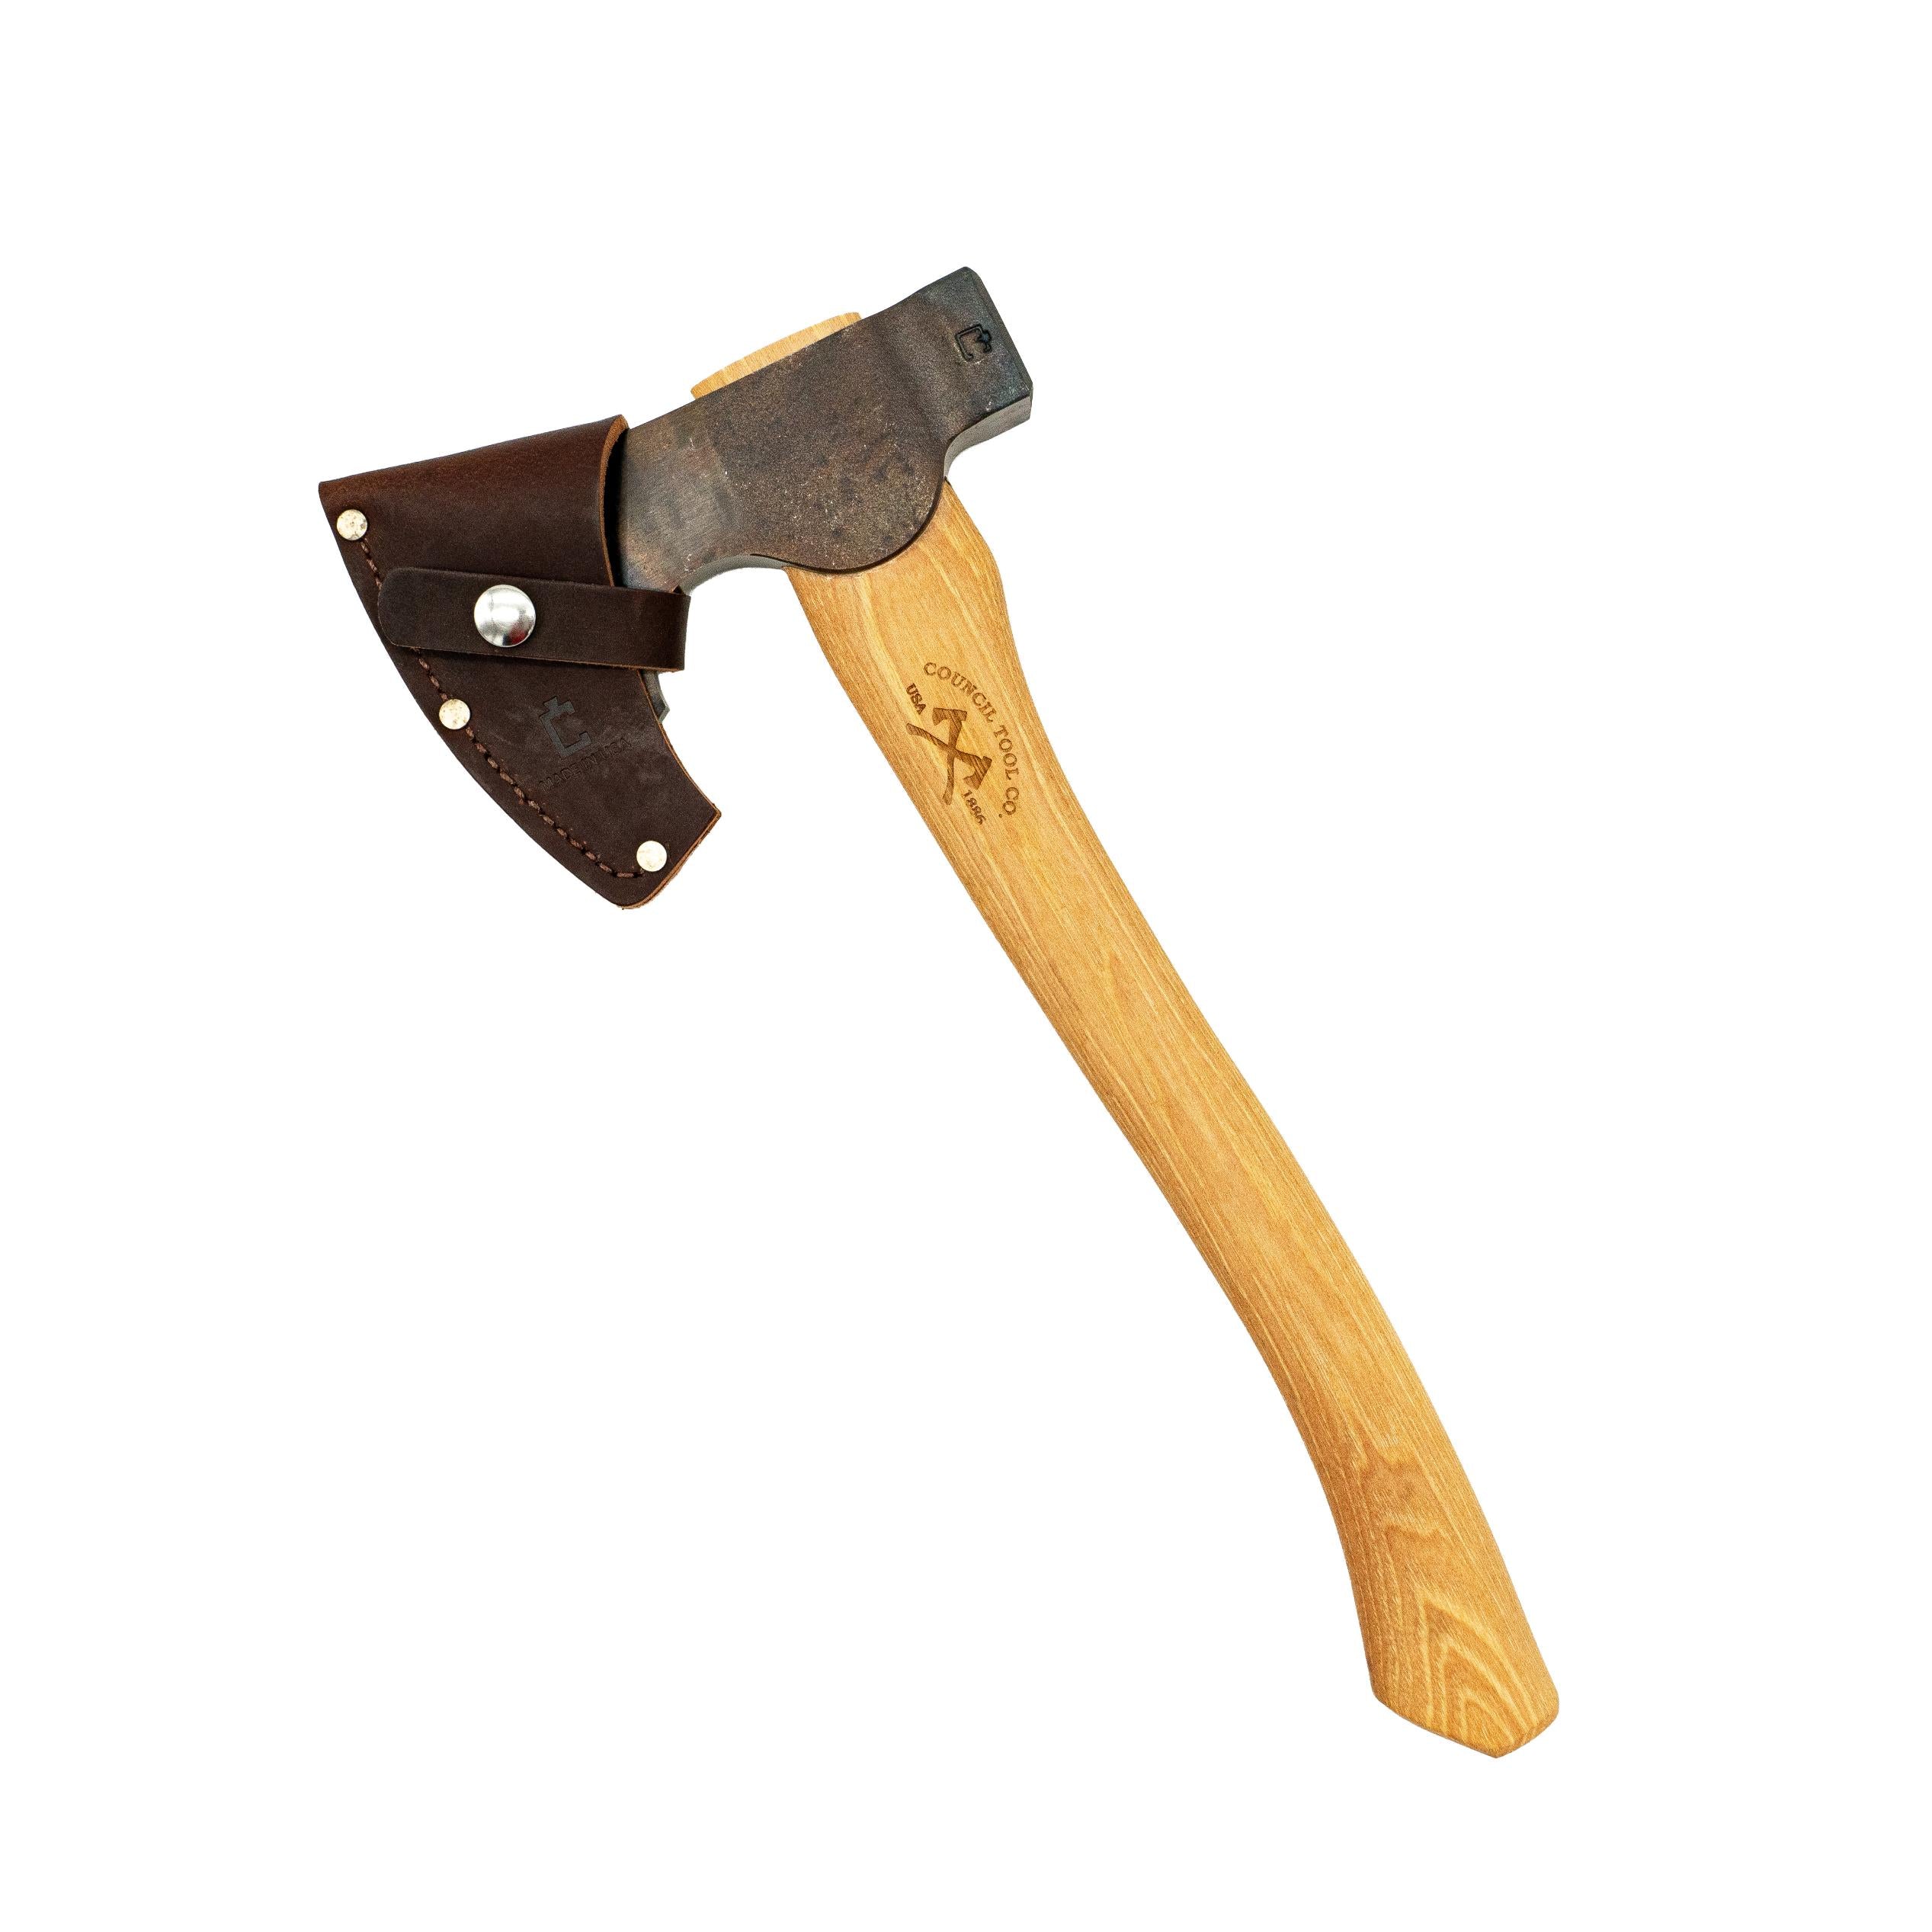 1.7 lbs. Wood-Craft Camp Carver, 16 in. Curved Handle